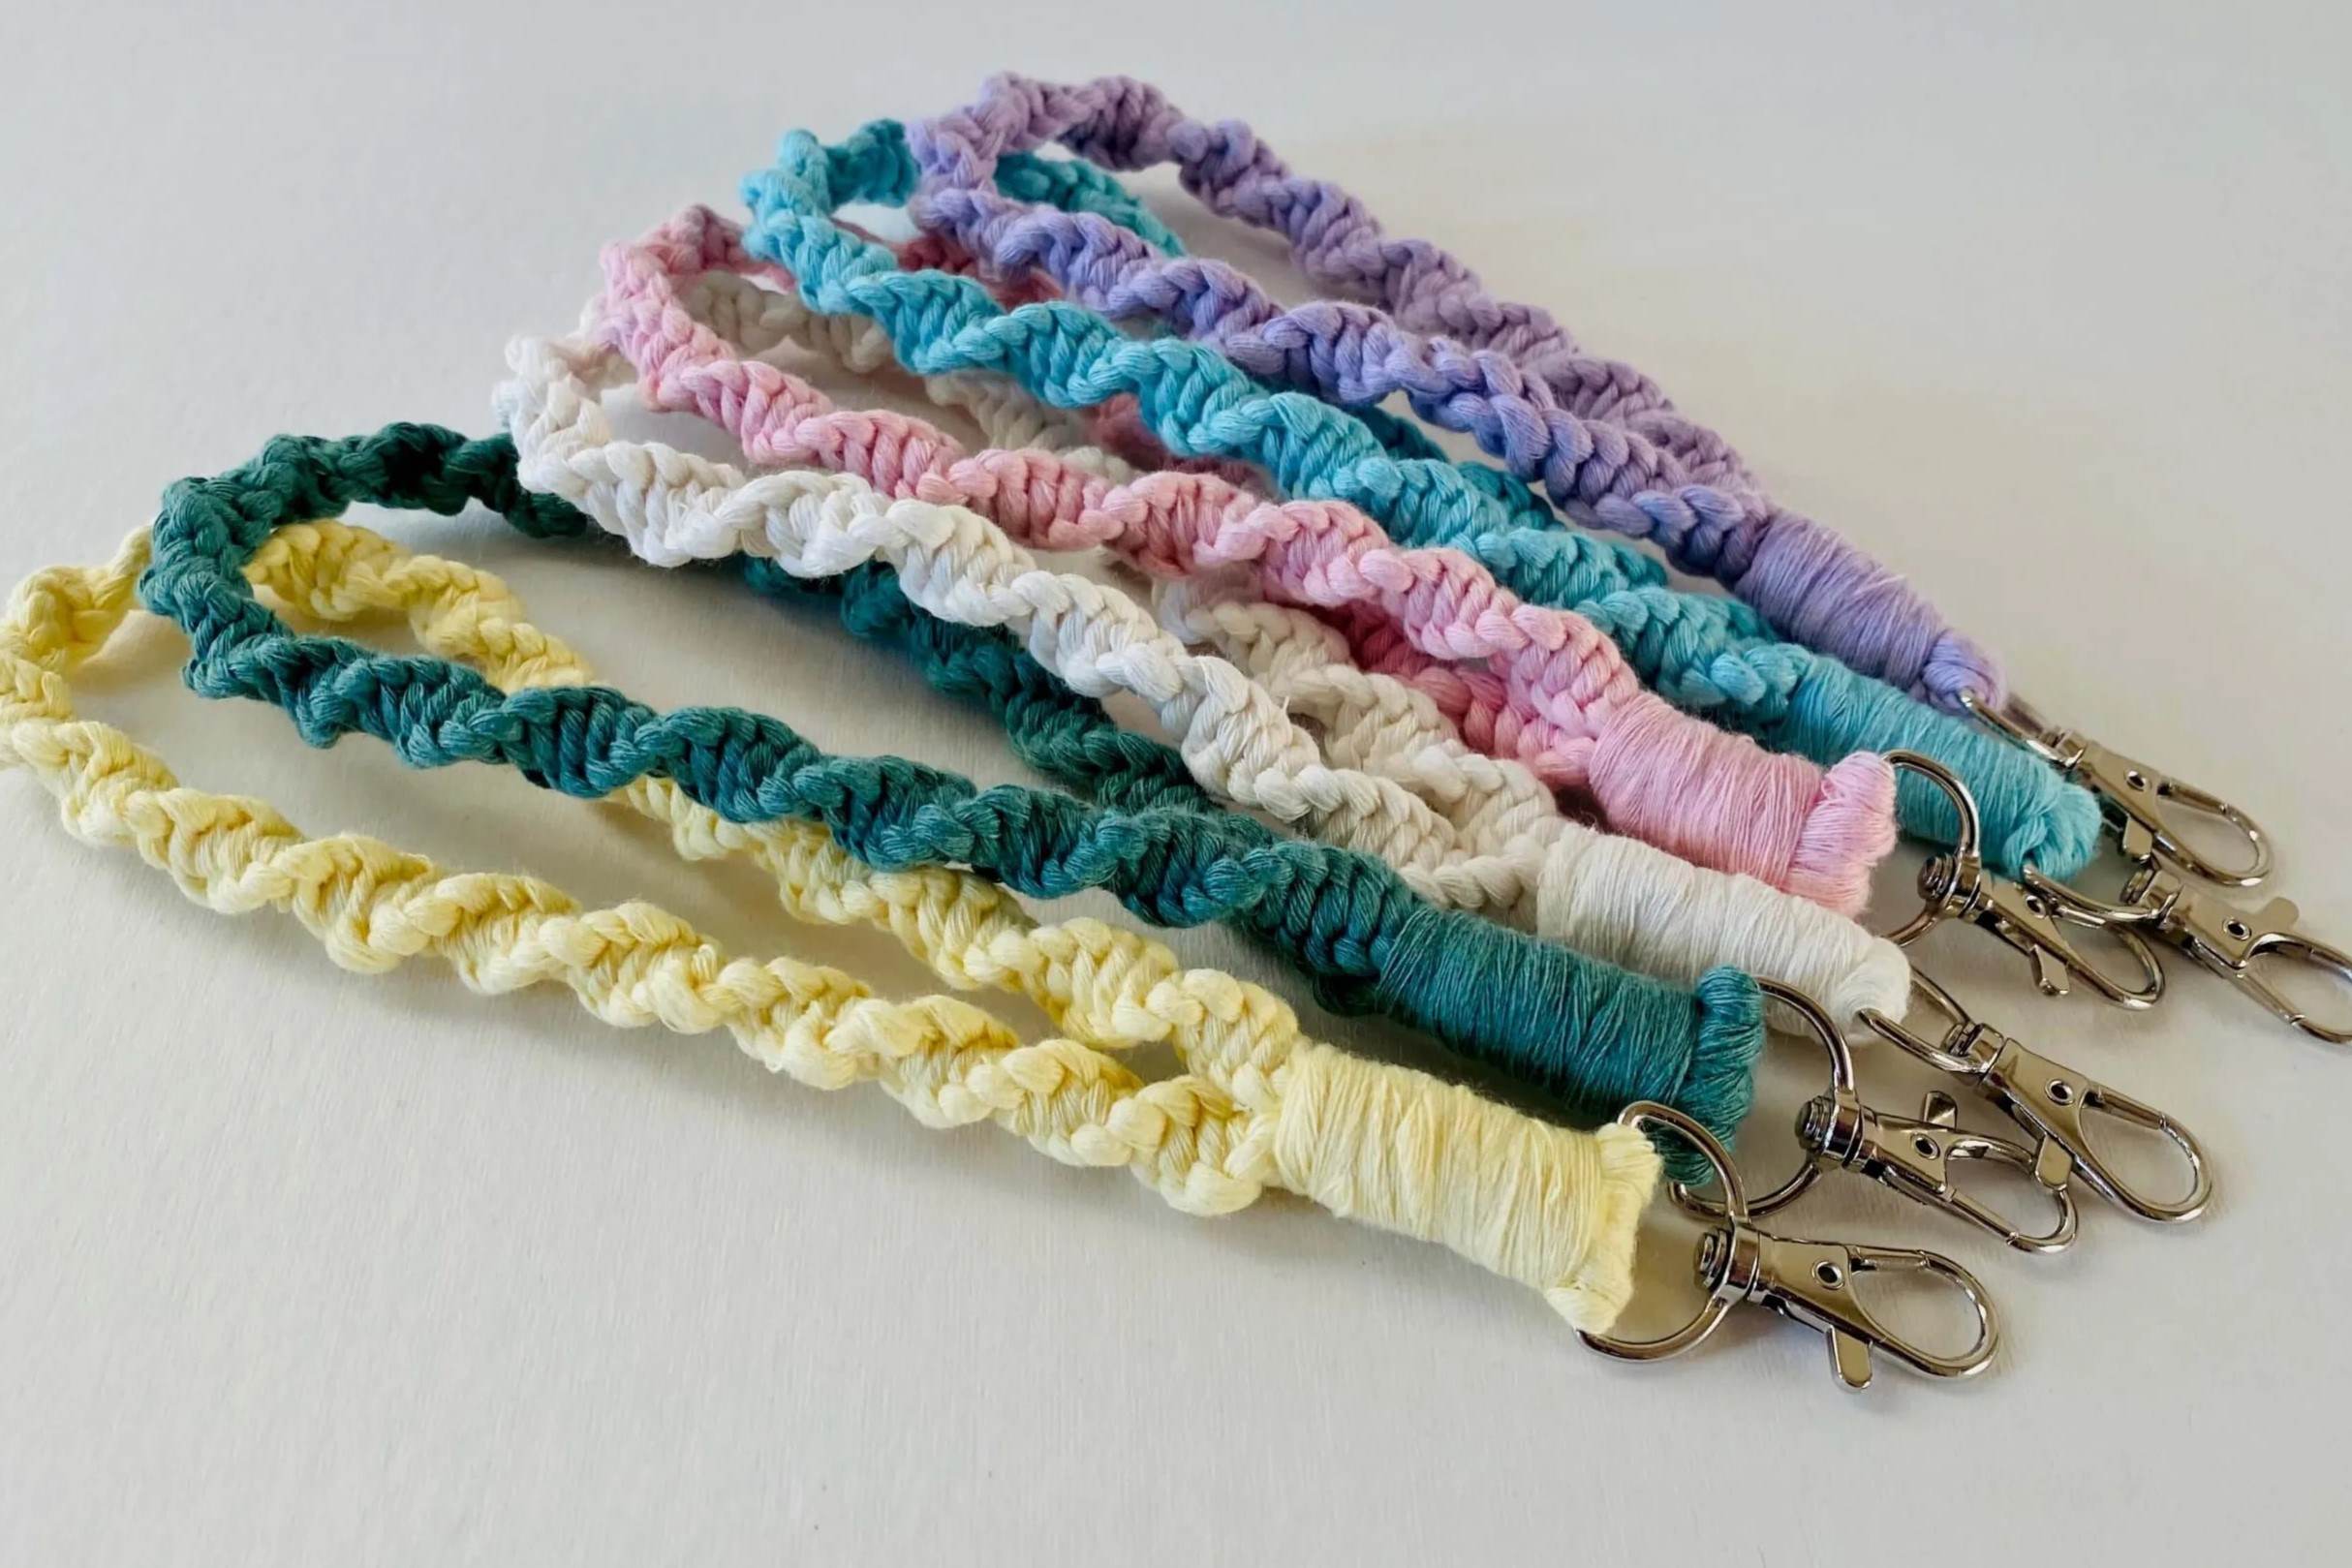 Spiraled Elegance: Step-by-Step Instructions On Making A Spiral Lanyard